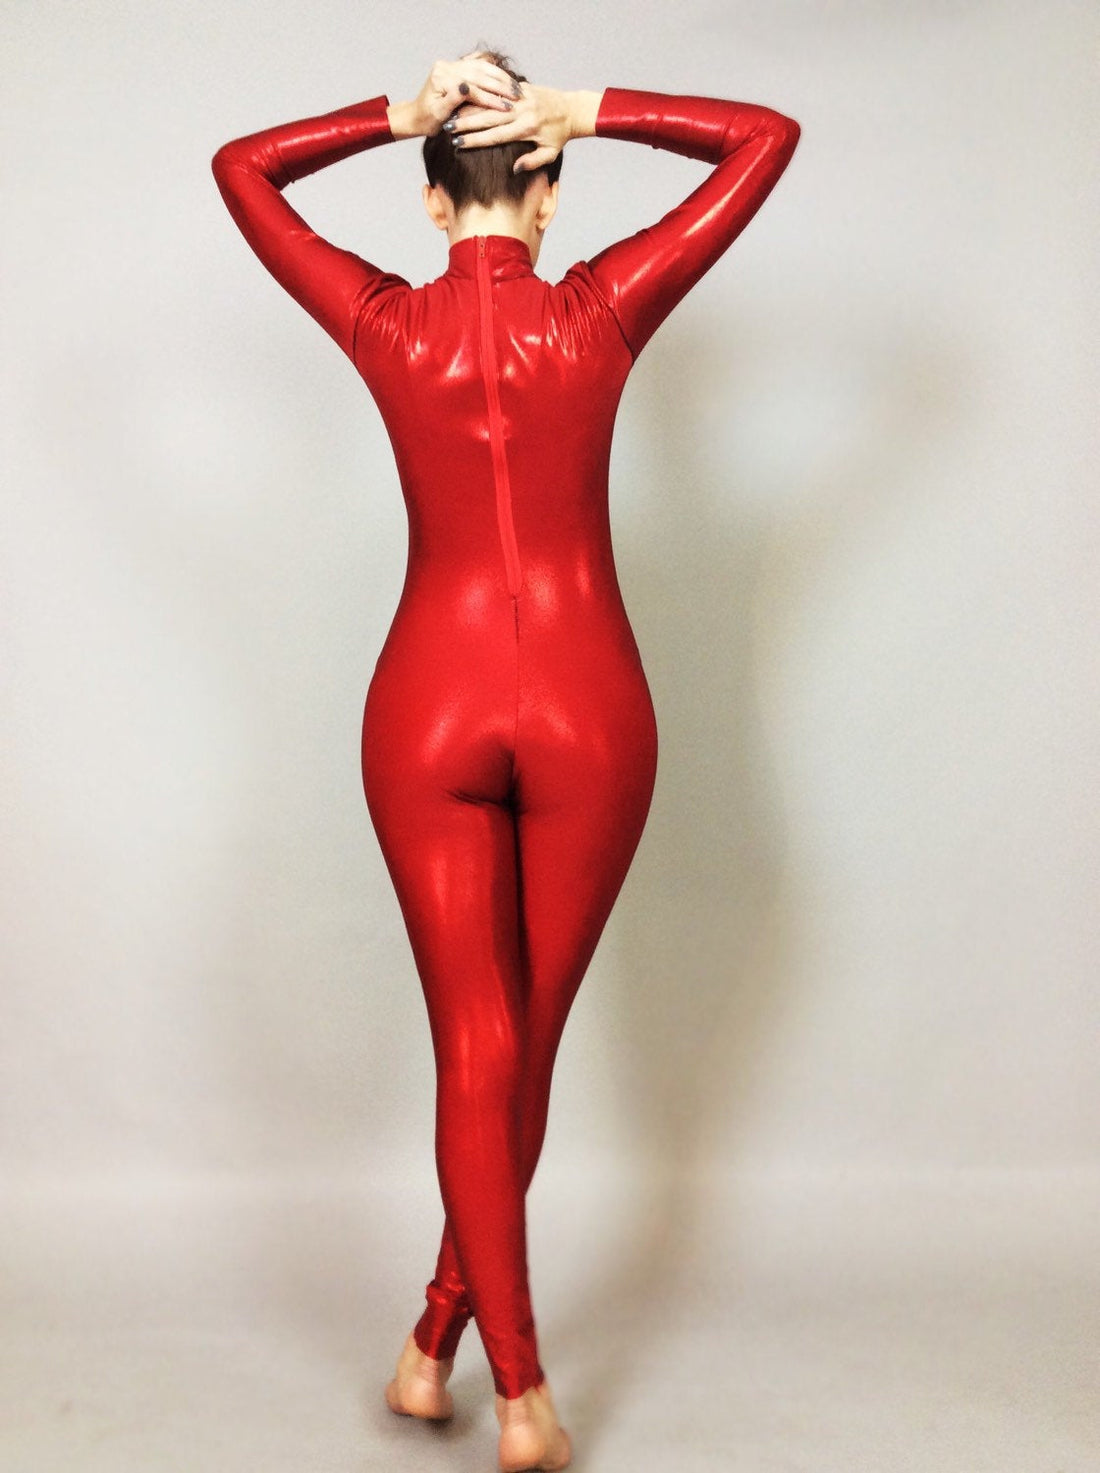 Bodysuit Costume, Britney Spears, Custom Made for Women or Men, Circus Outfit, Exotic Dancewear